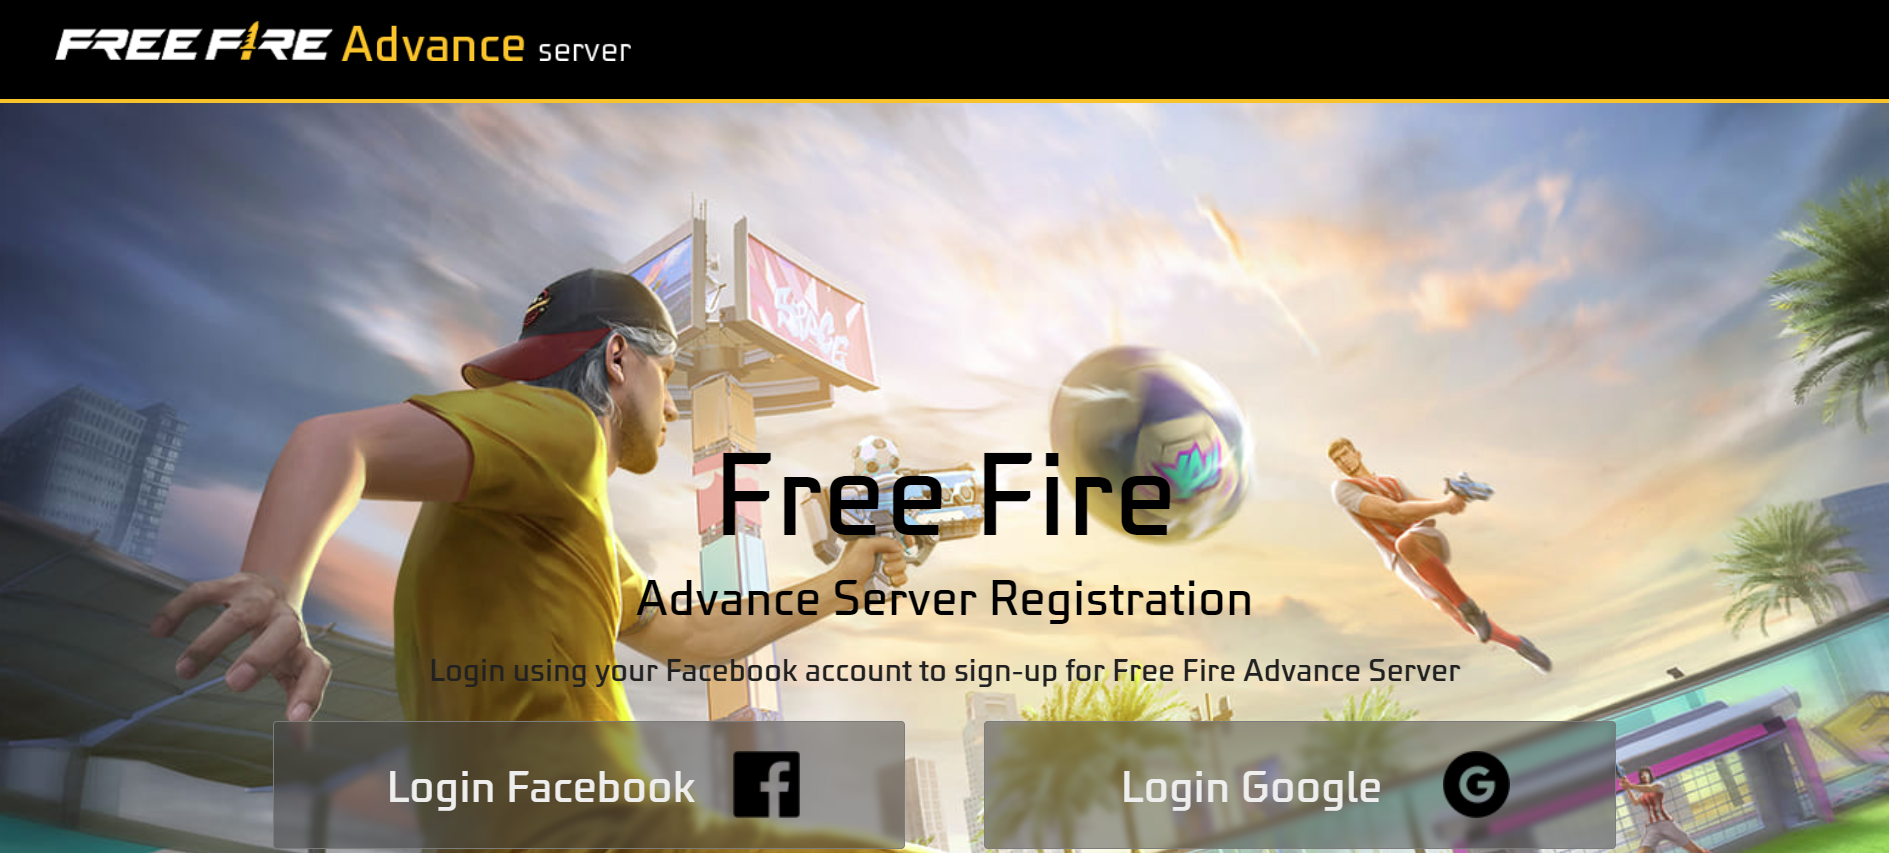 How To Register In Free Fire Advance Server